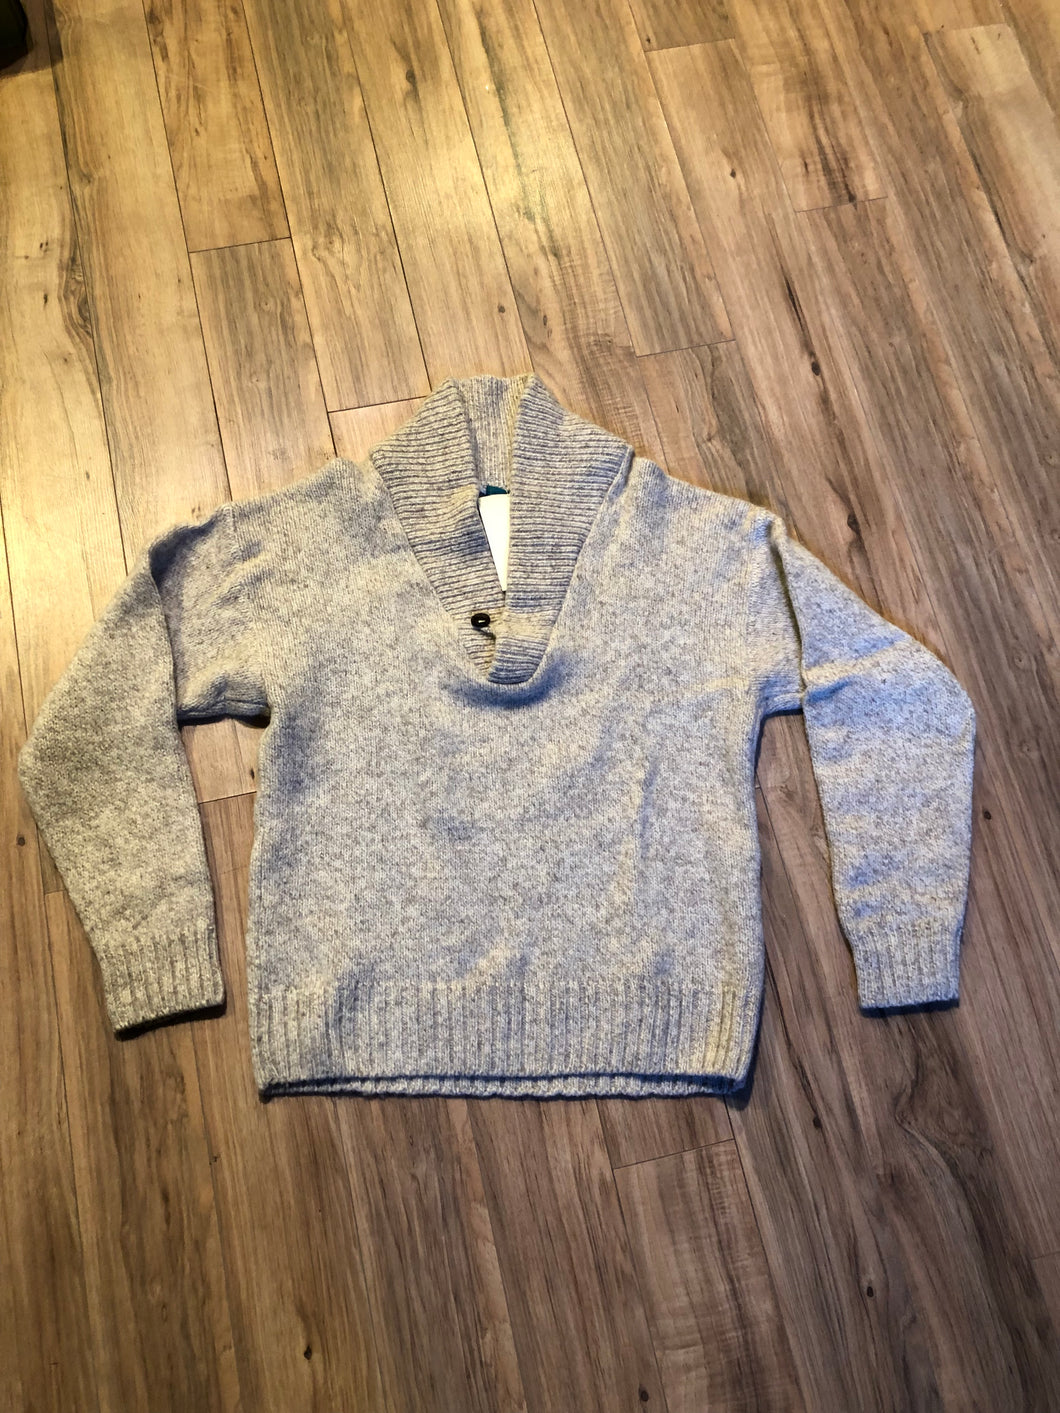 Kingspier Vintage - Vintage Cricketeer wool blend pullover sweater with shawl collar and one button.

Size large.